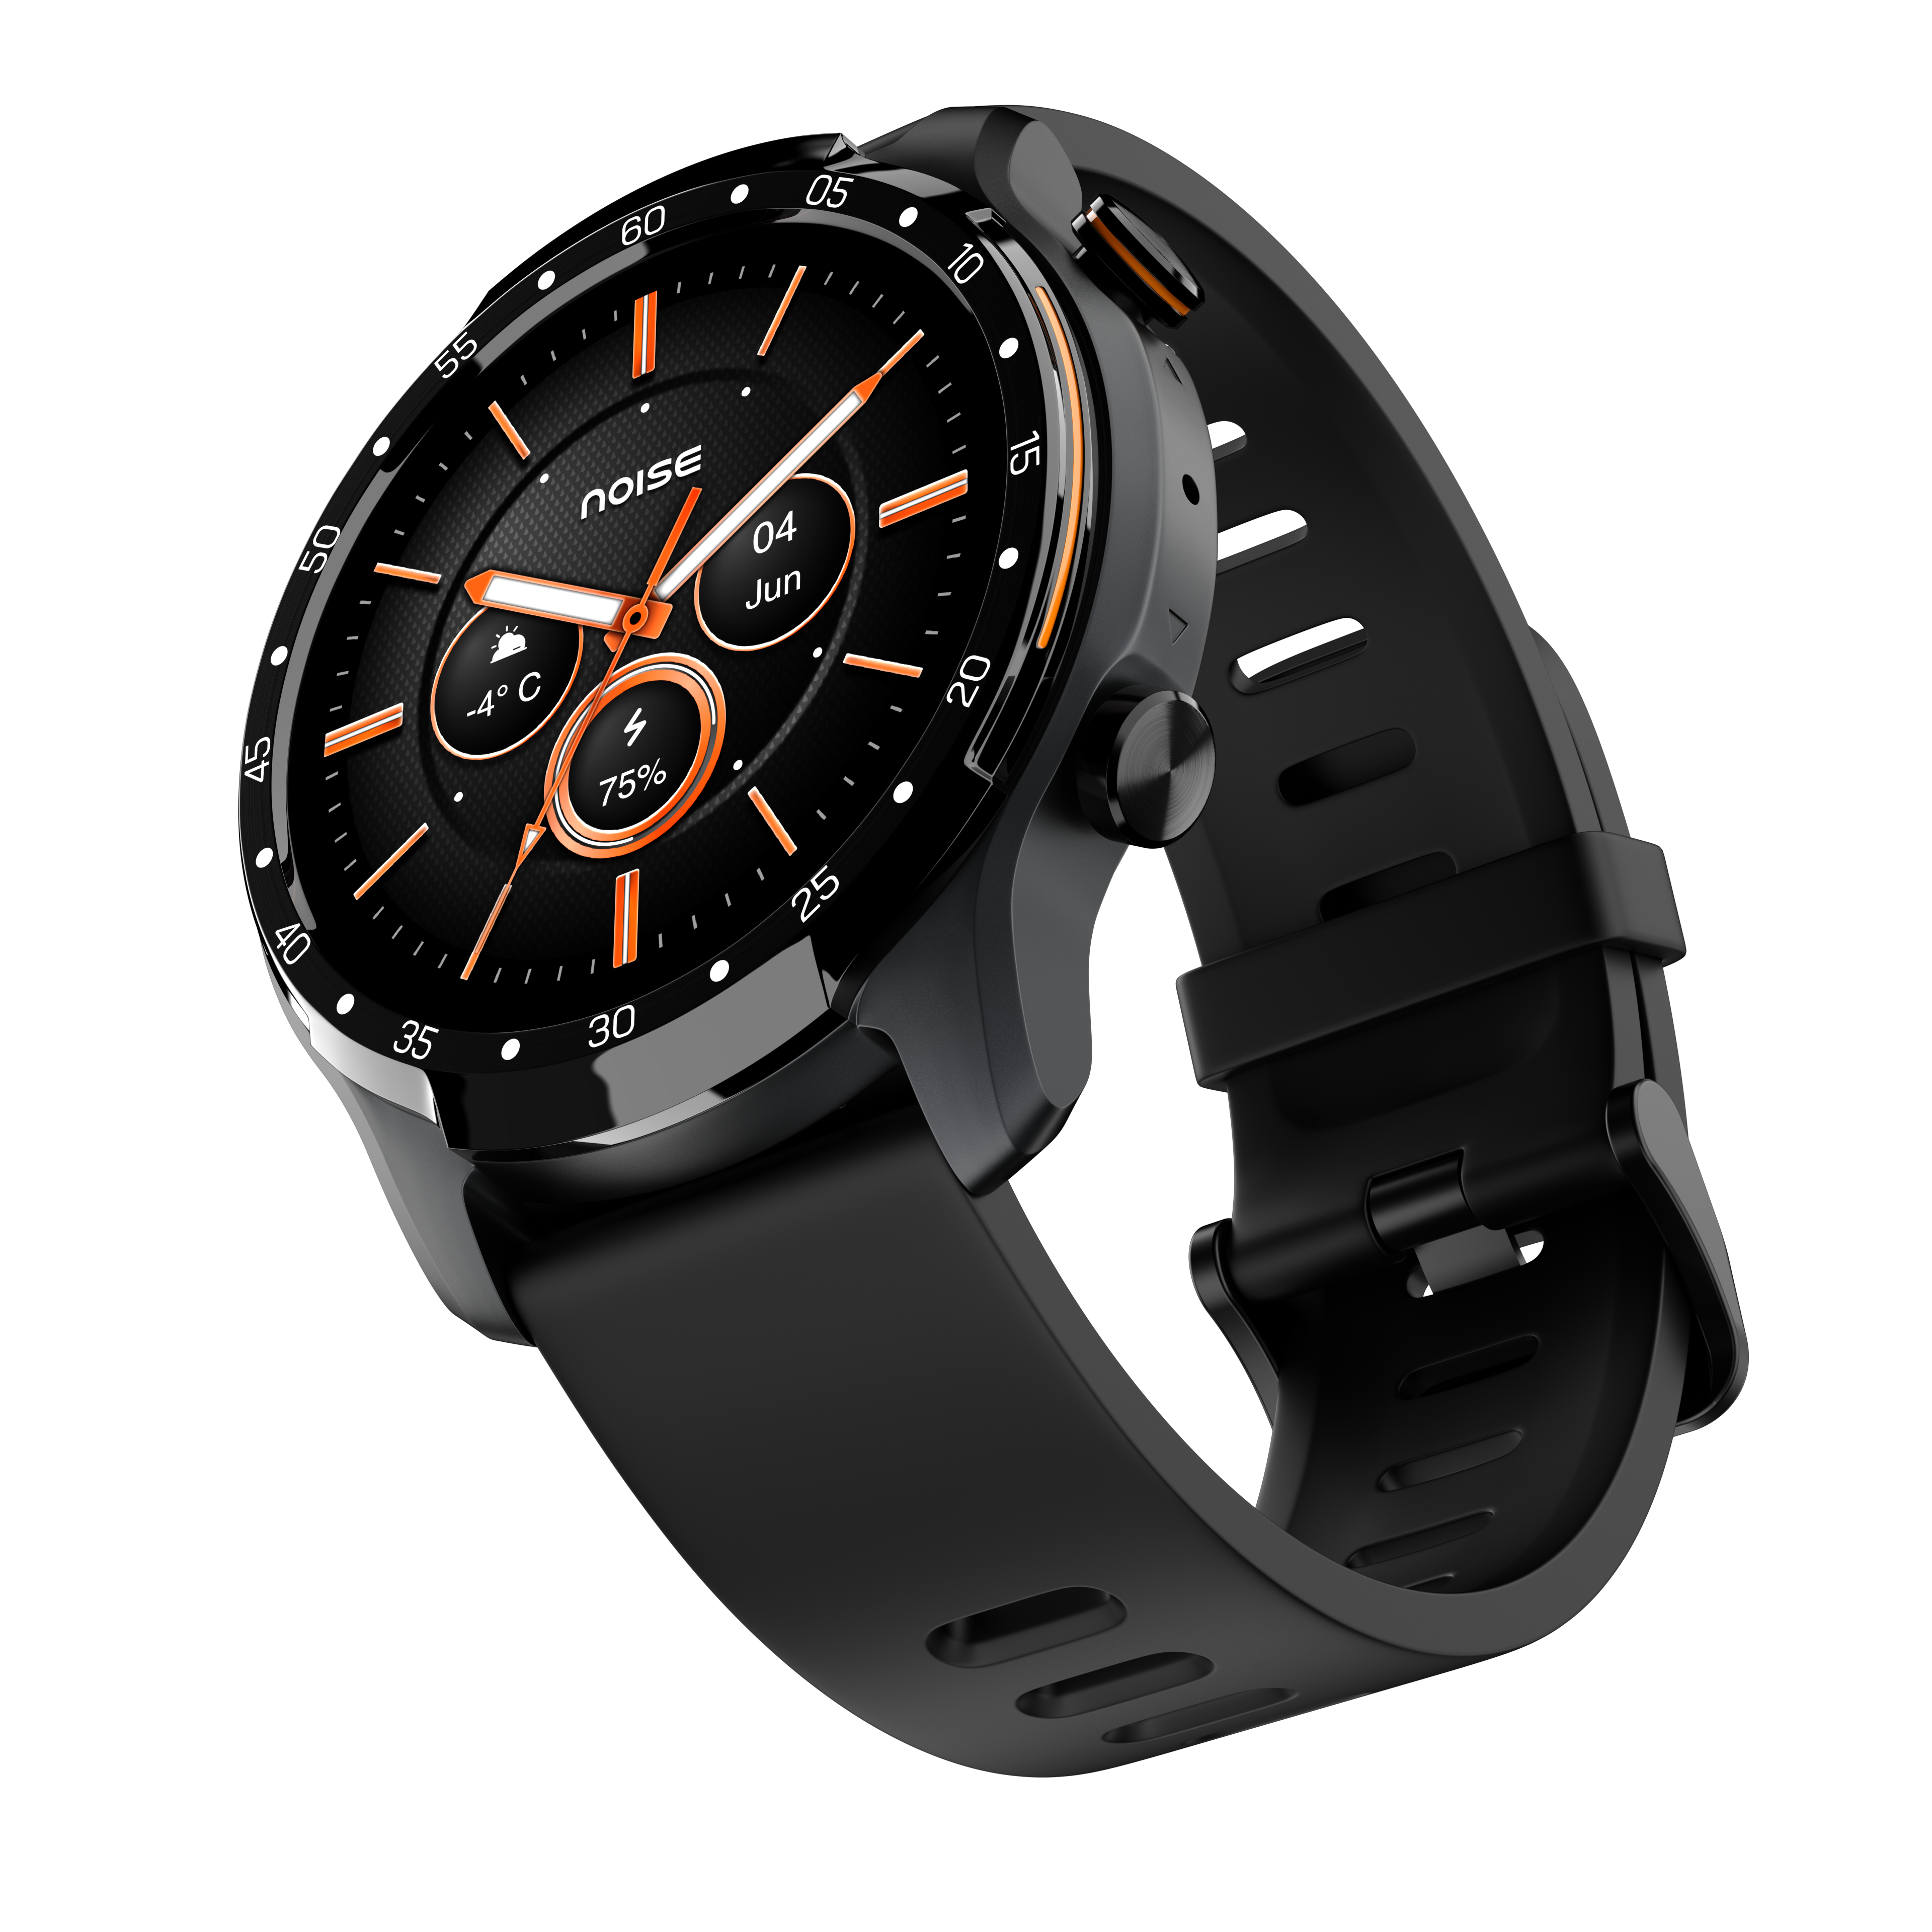 NoiseFit Voyage Smartwatch: Pricing and Availability